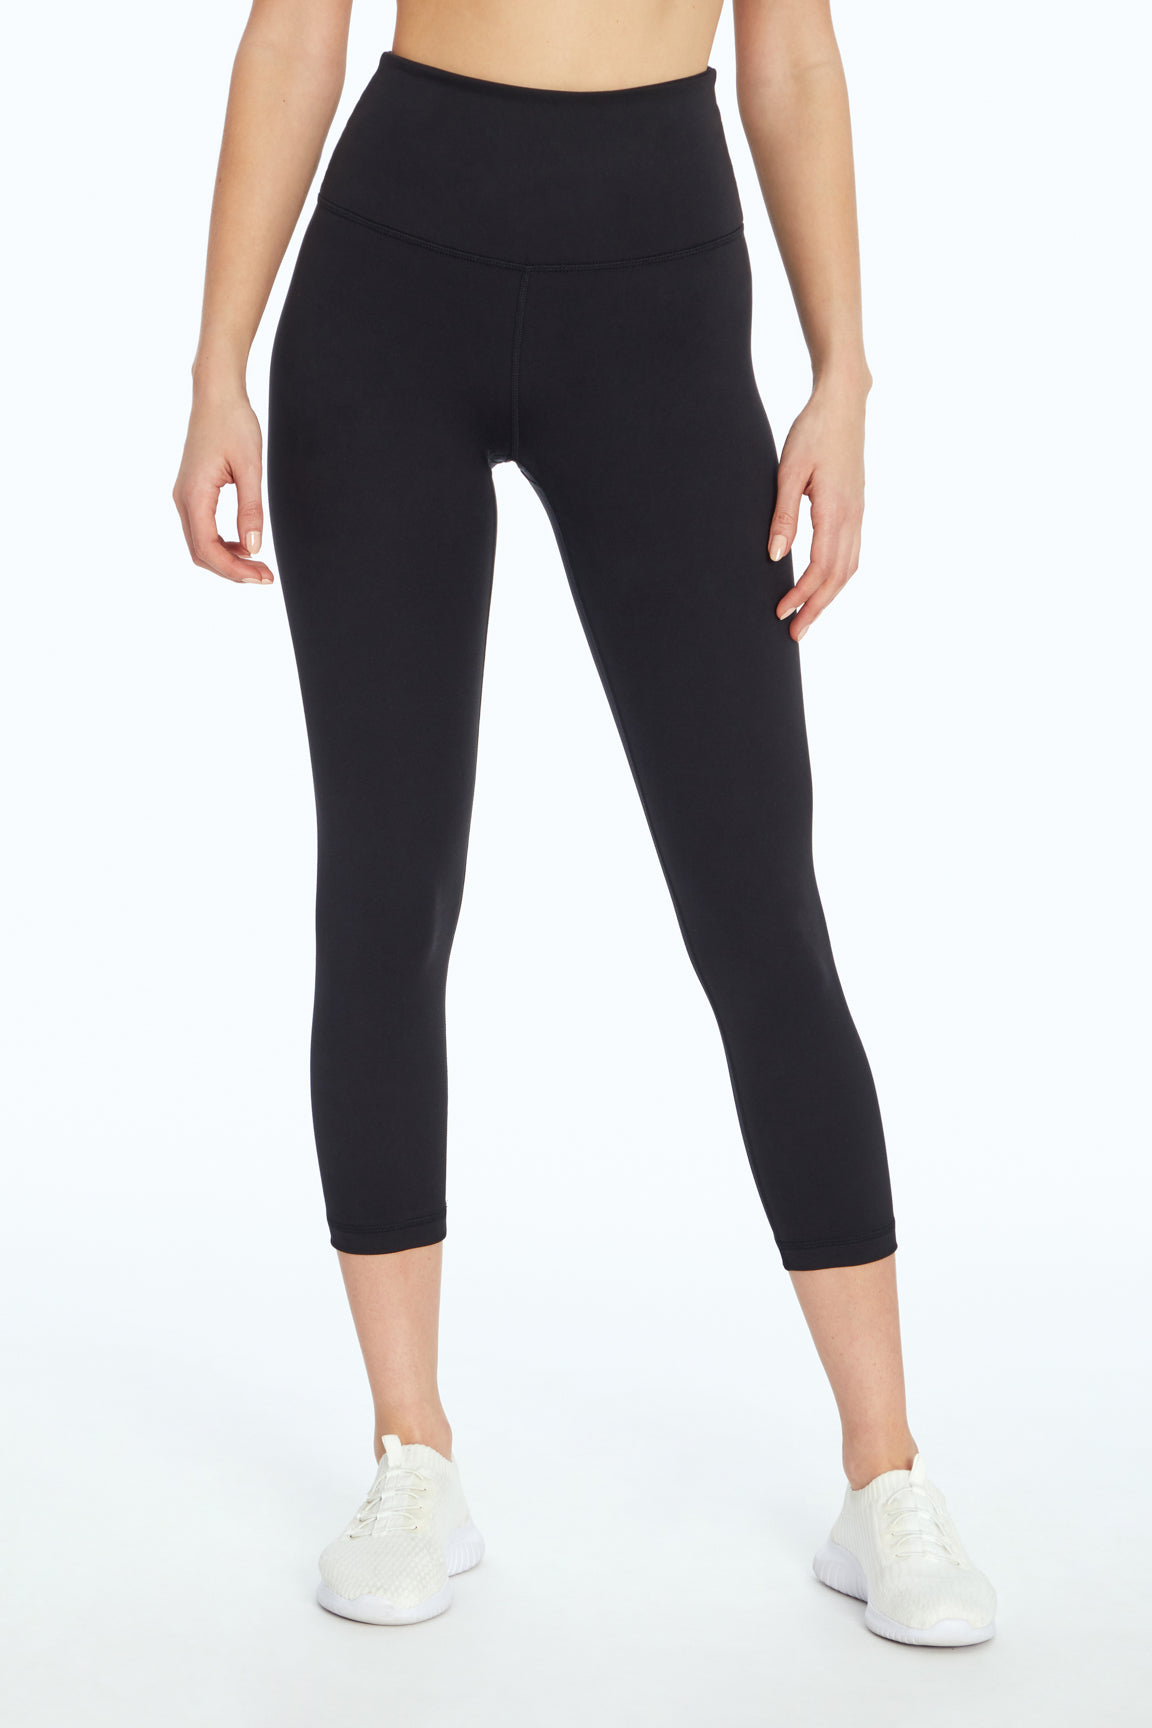 BALANCE COLLECTION Activewear & Workout Clothes